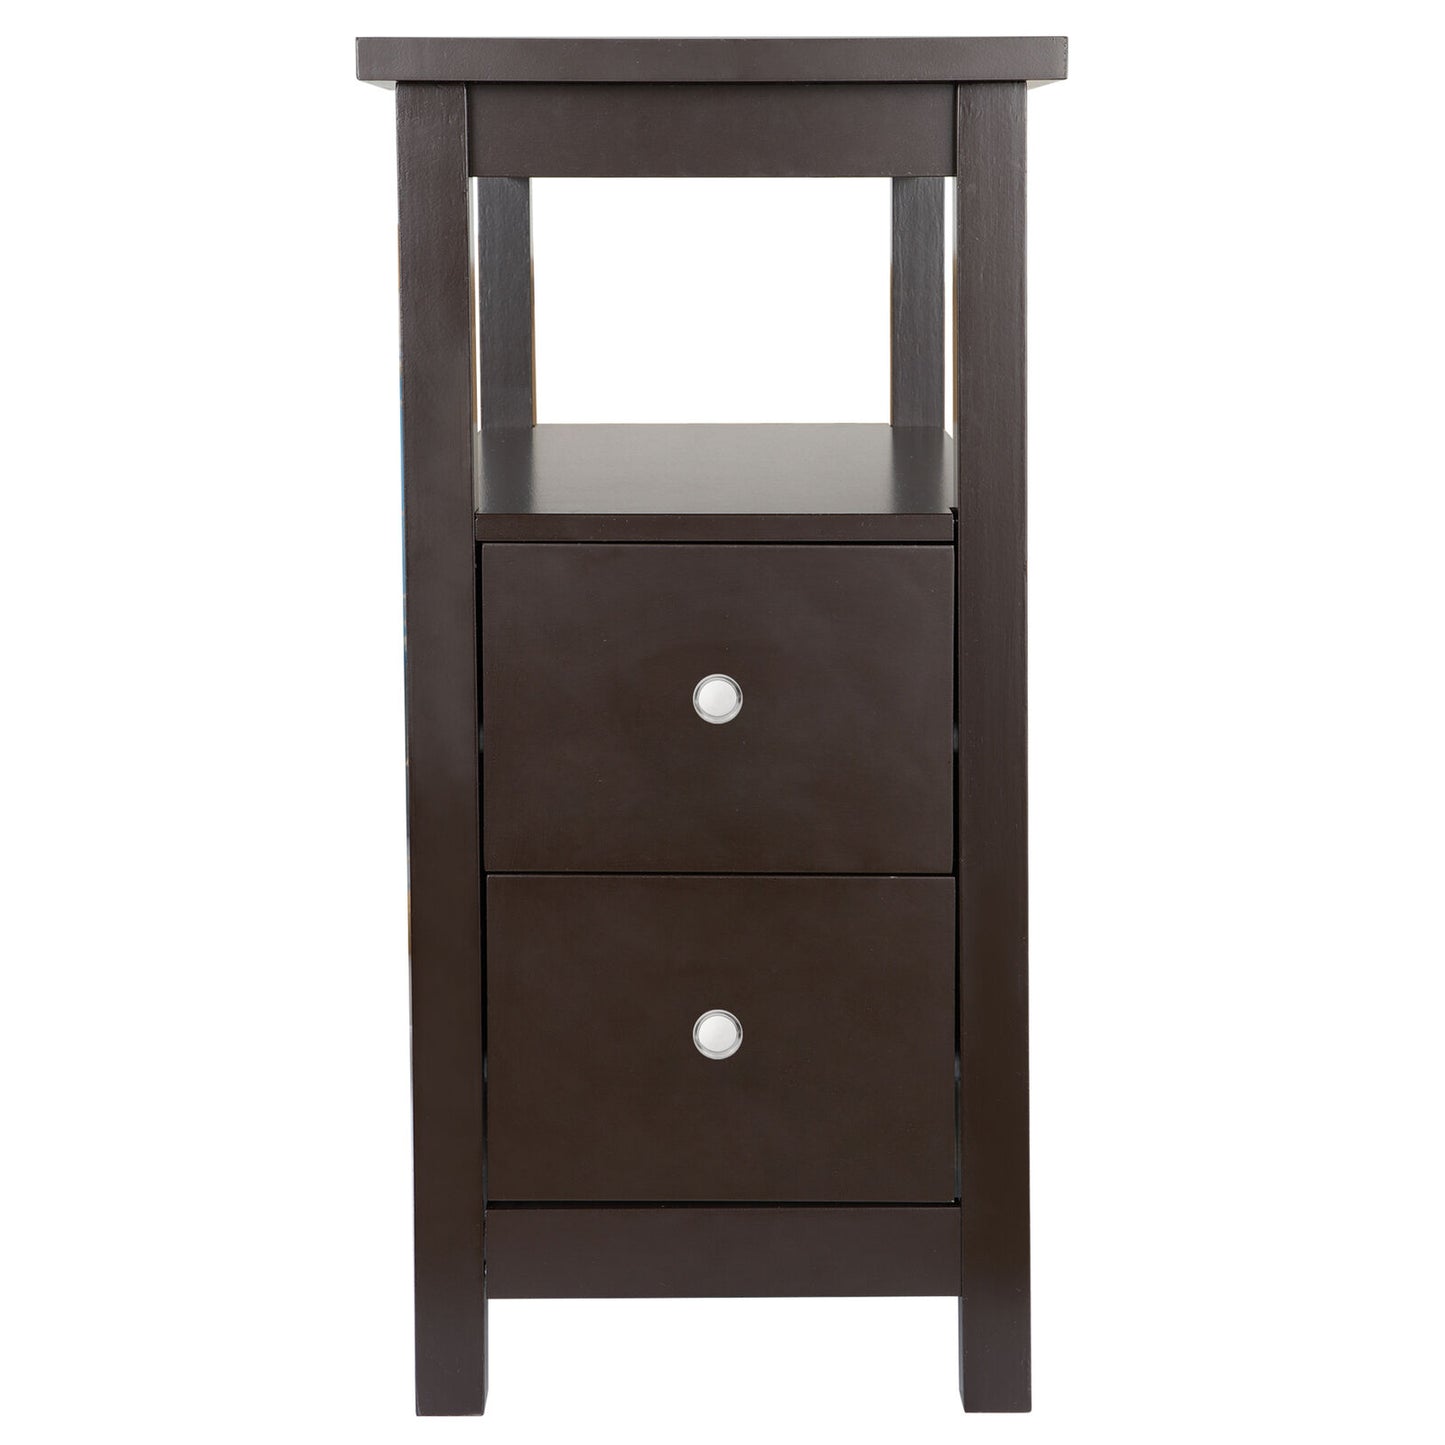 Brown End Table with 2 Drawer and Shelf Narrow for Living Room